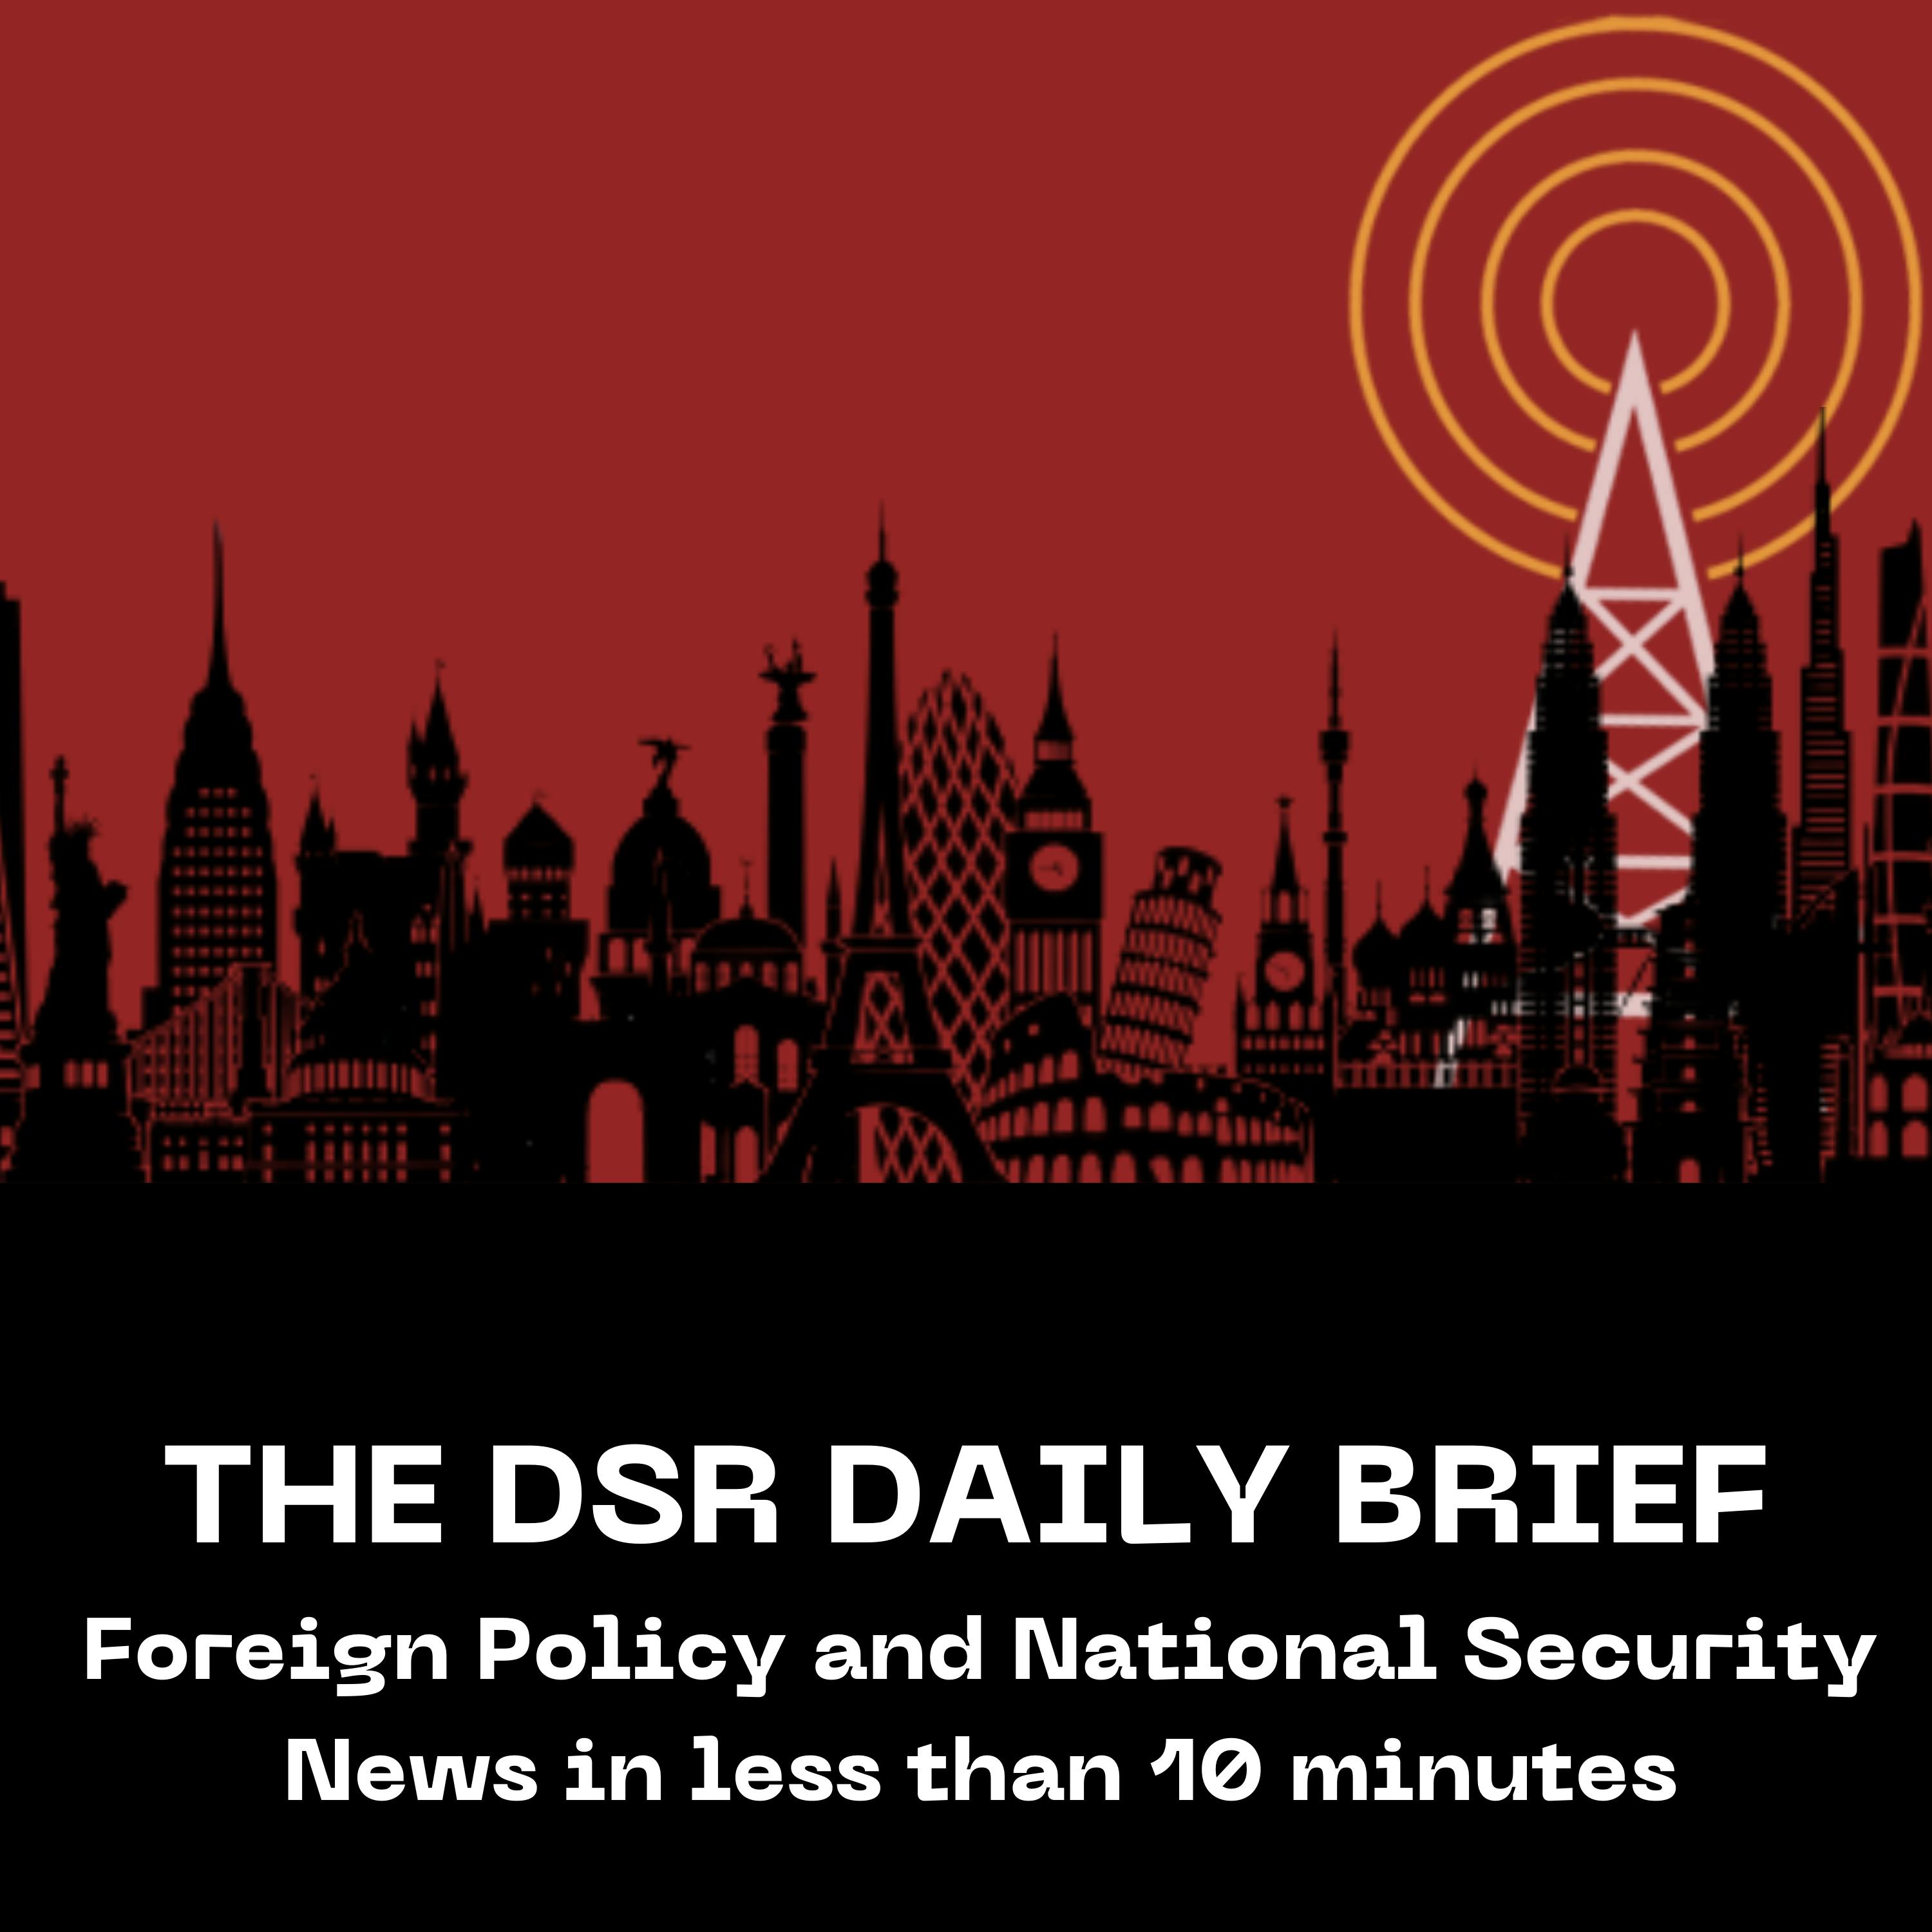 The DSR Daily for December 5: Israeli Forces Storm Khan Younis, Liz Cheney Weighs Presidential Bid